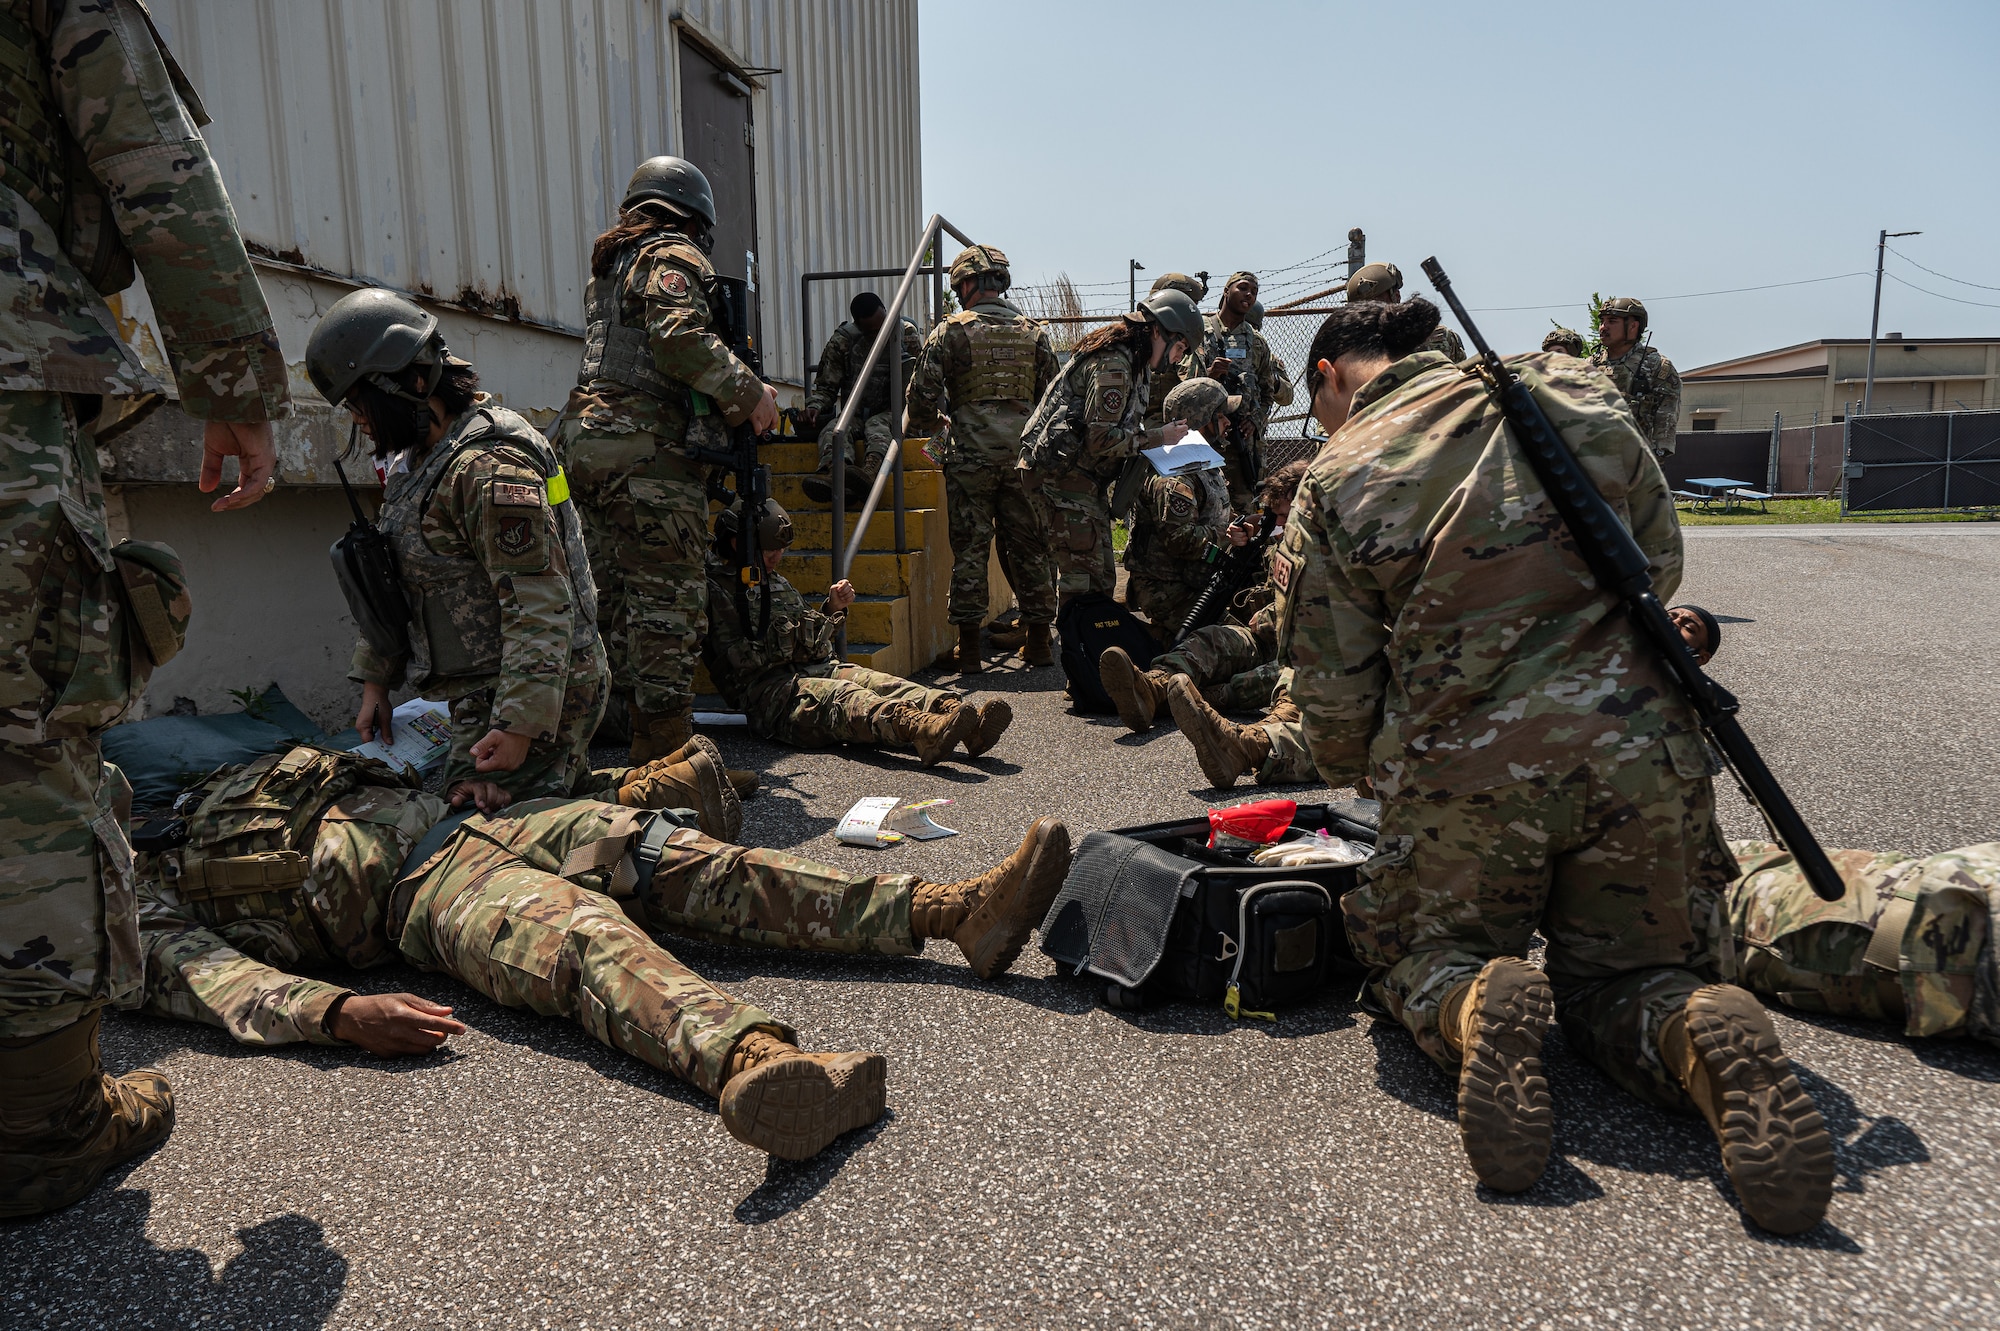 Airmen of the 8th Medical Group go through procedures of a mass casualty in a simulated training event.